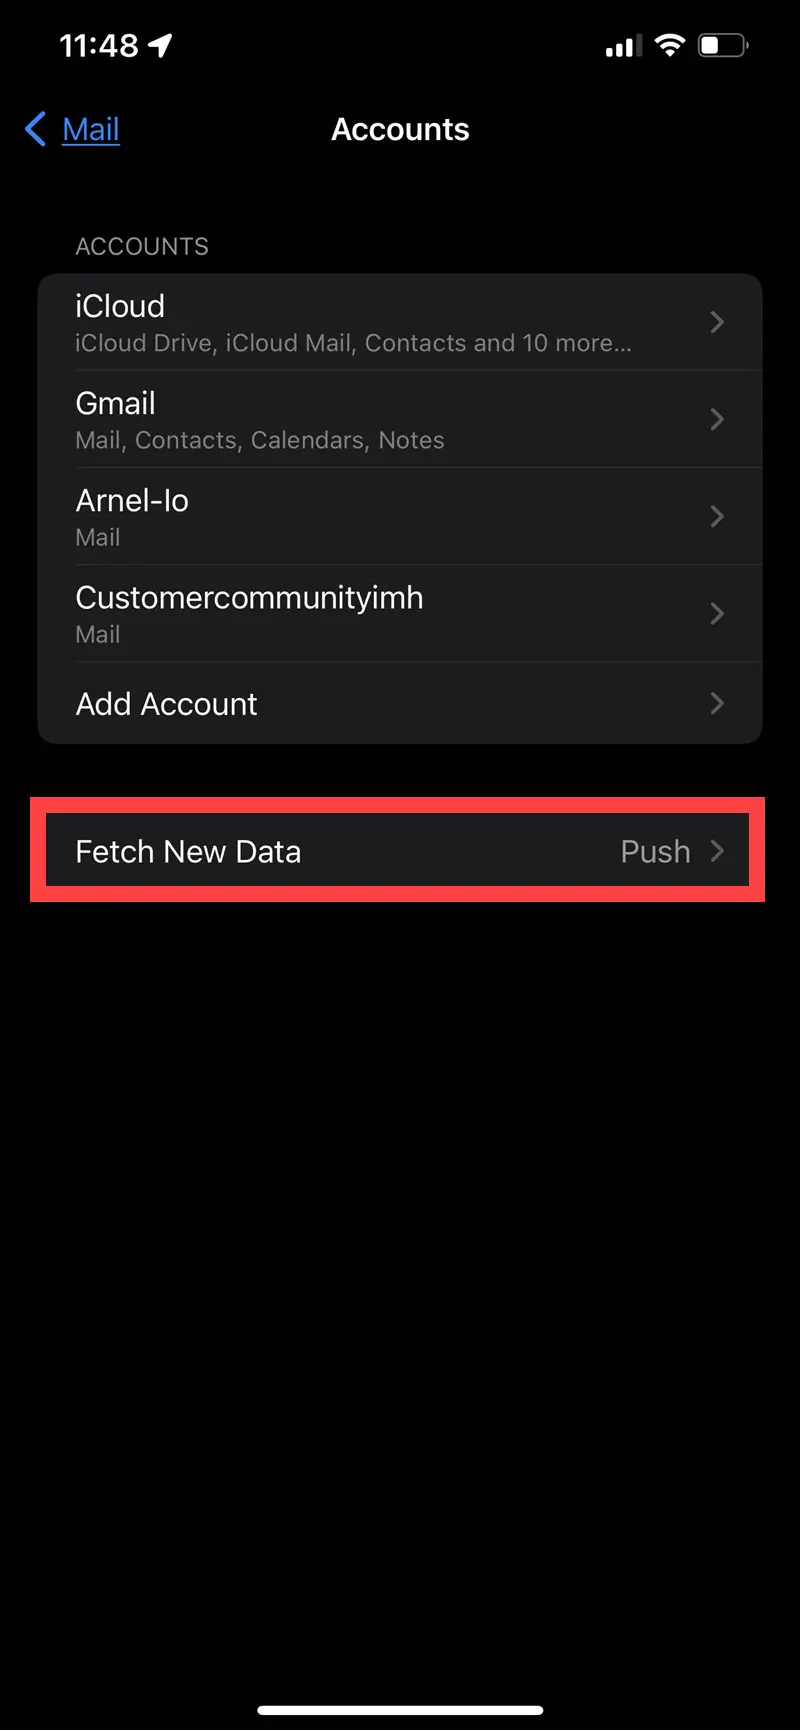 Click on Fetch New Data